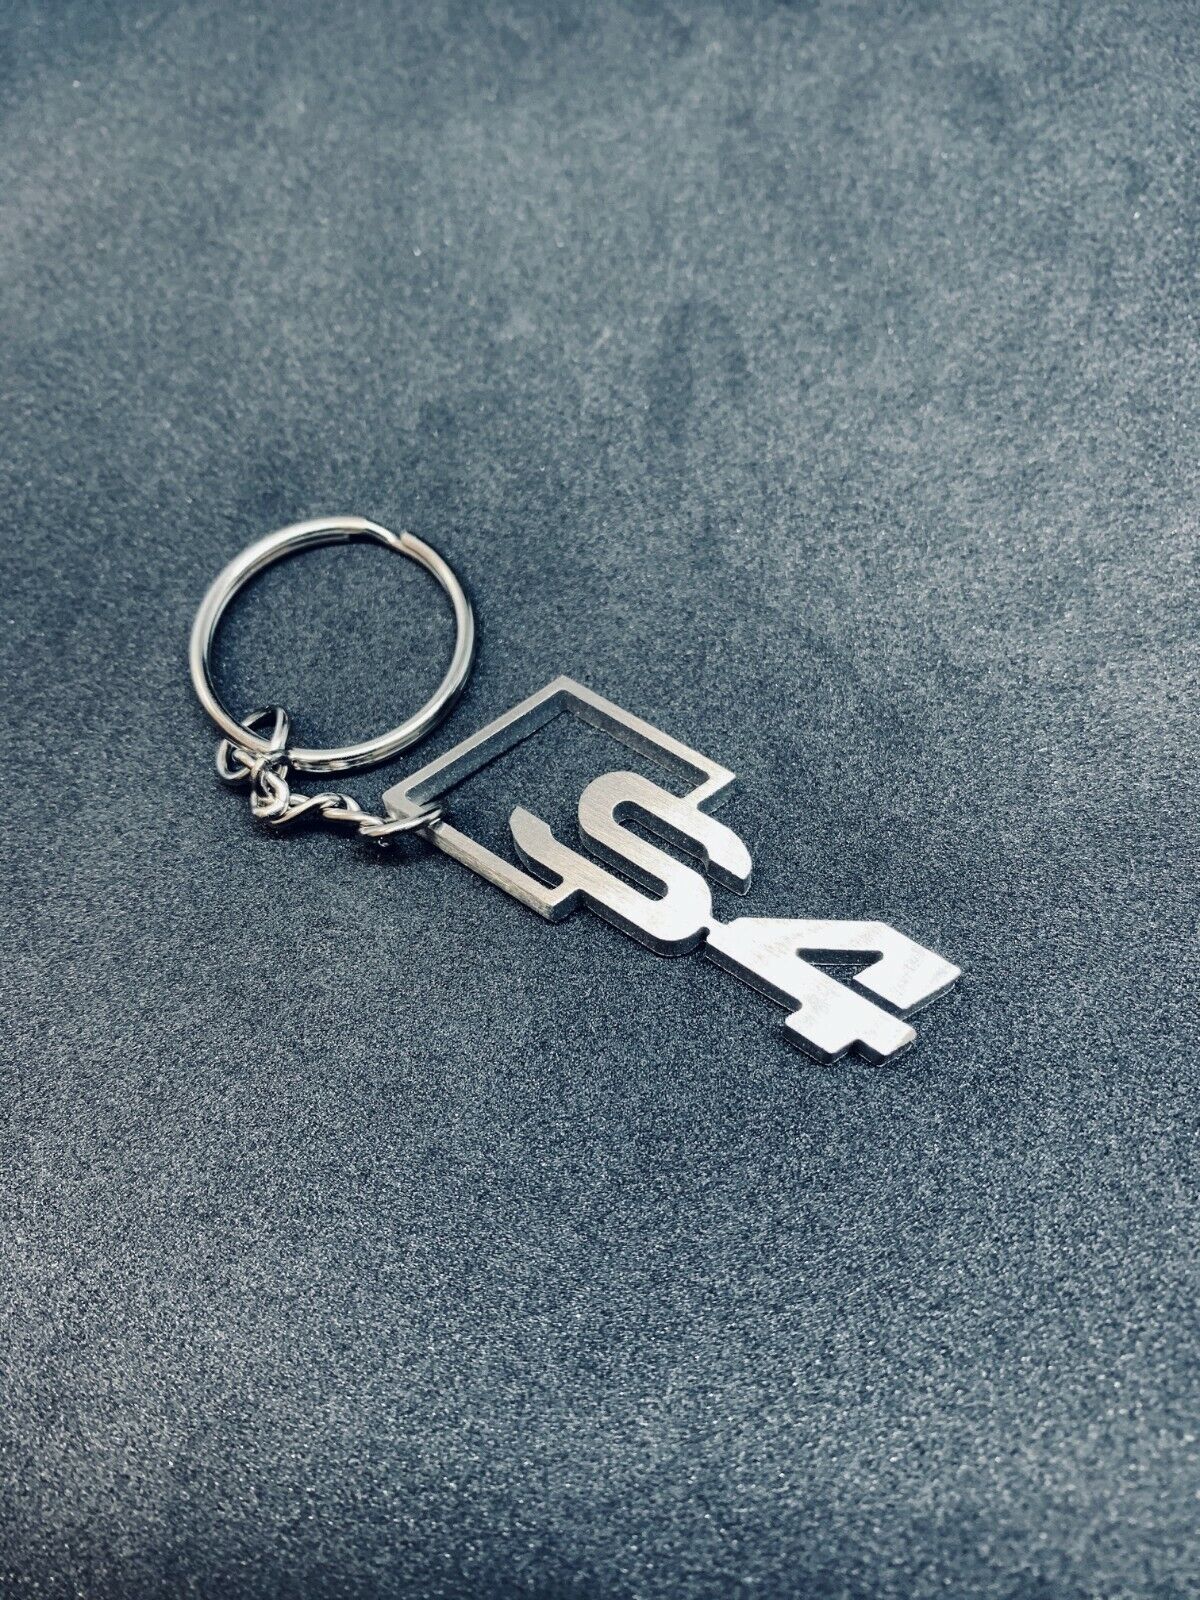 Audi S4 Key Chain, Stainless steel